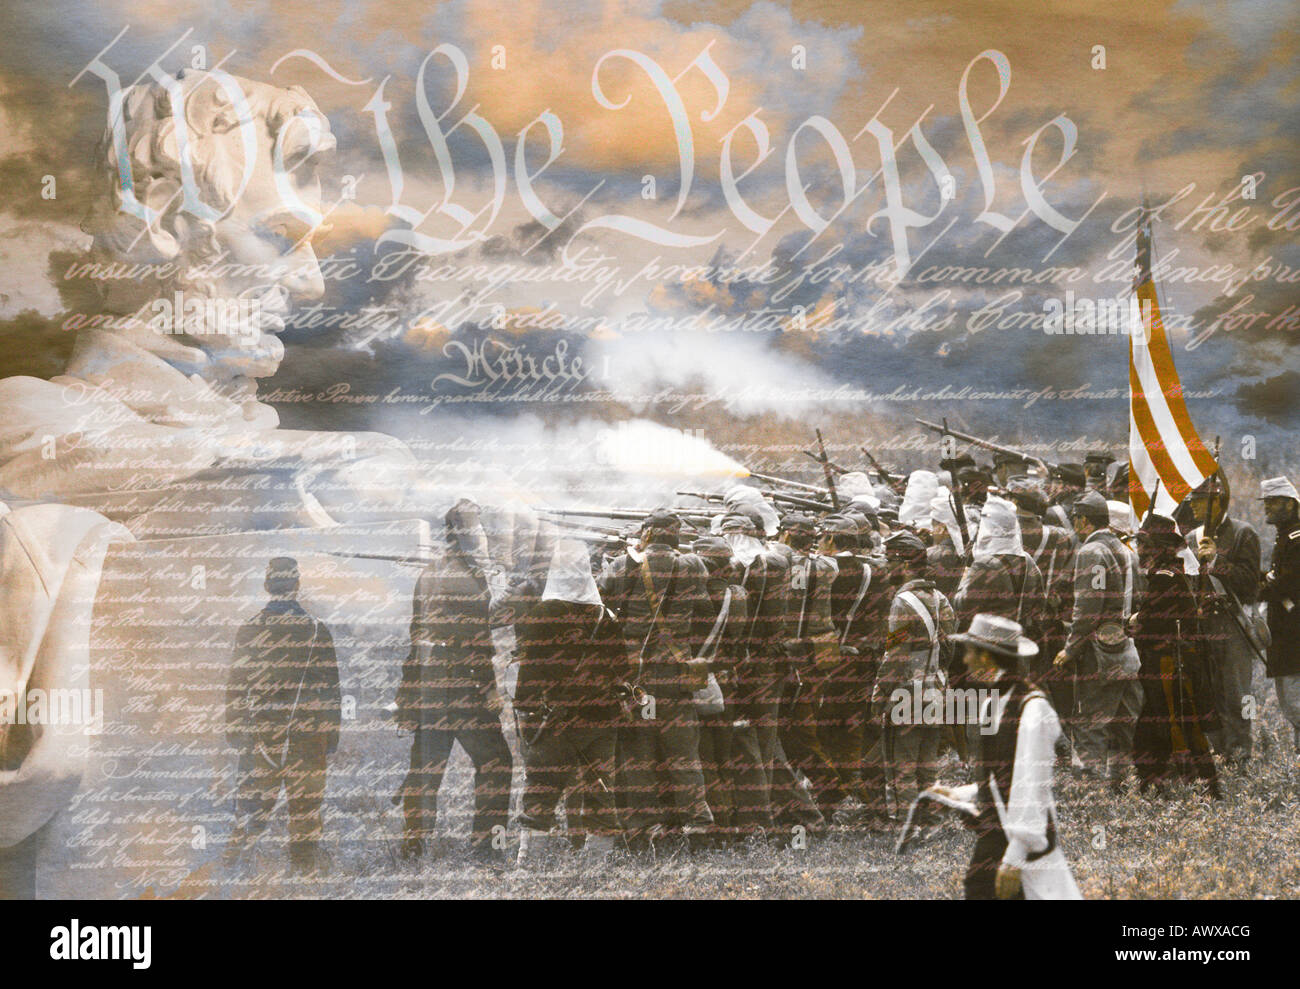 Composite image of Lincoln Memorial and Civil War soldiers in battle with U.S. Constitution Stock Photo